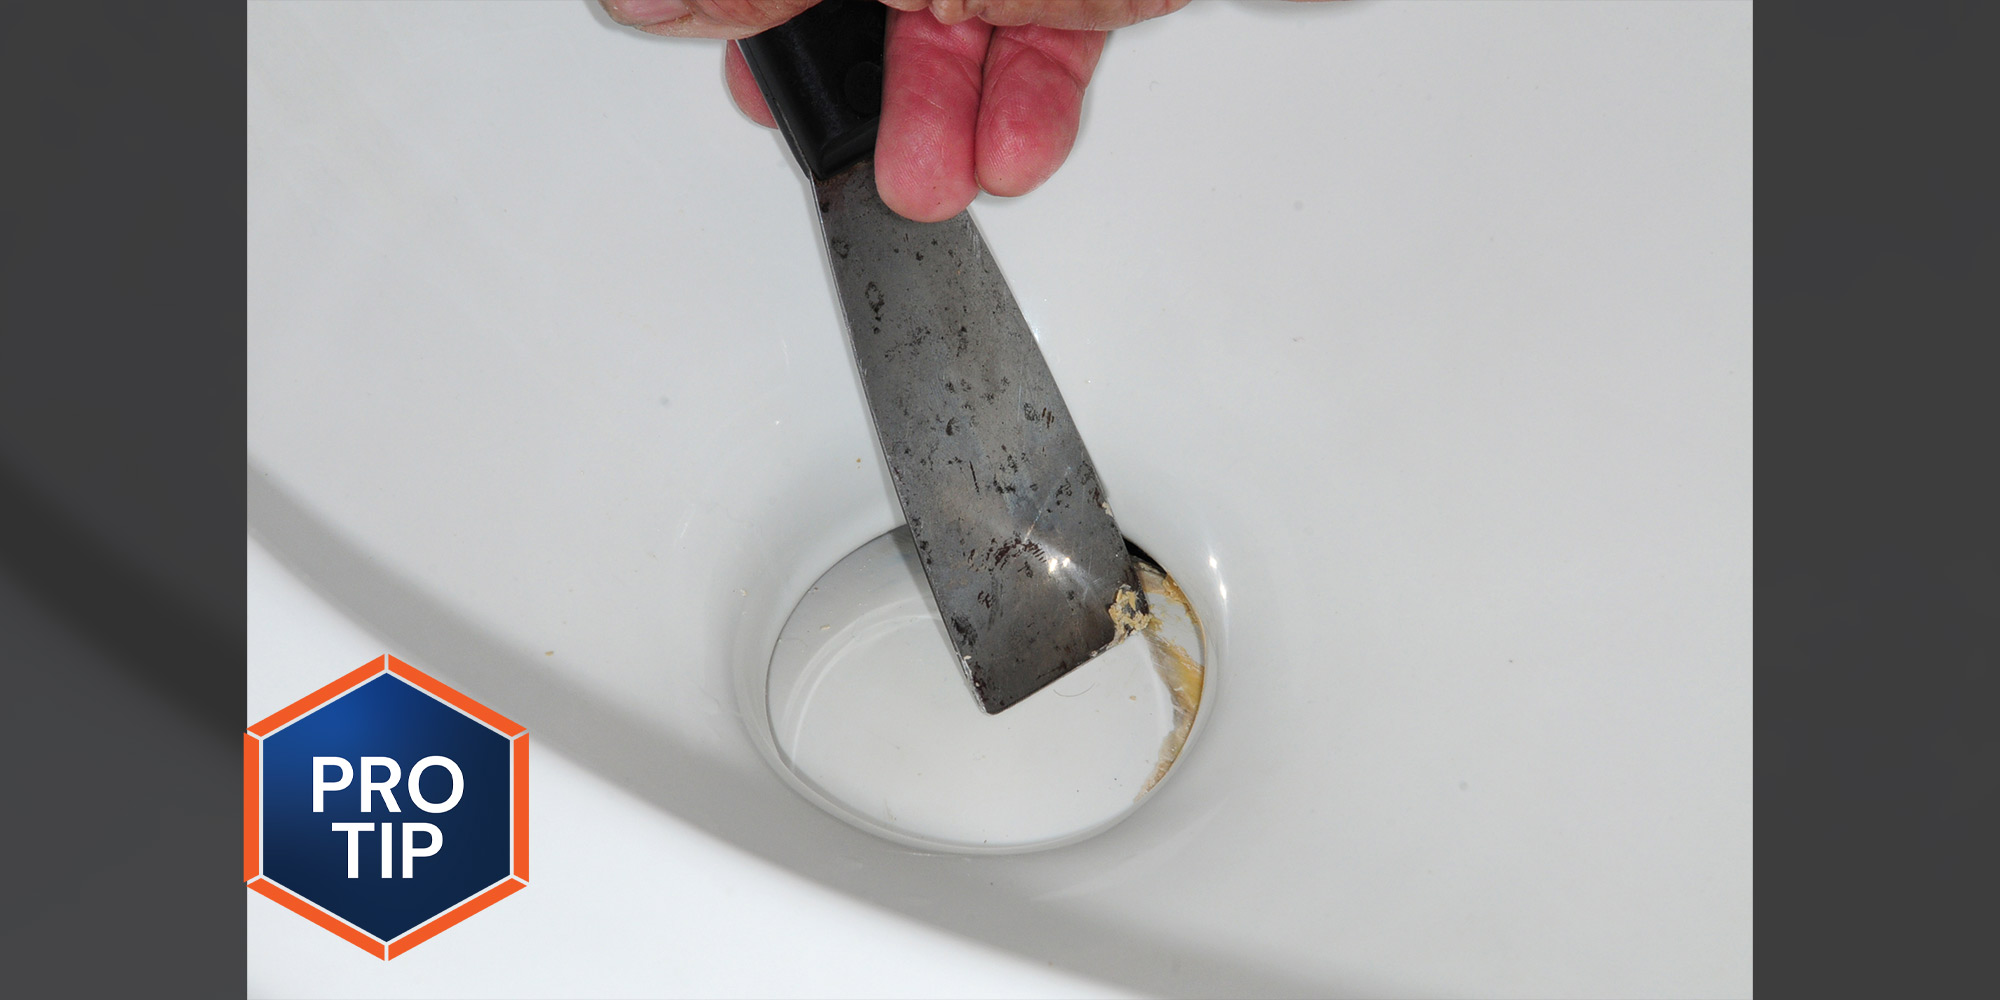 a putty knife is used to scrape a seal residue from an RV toilet valve